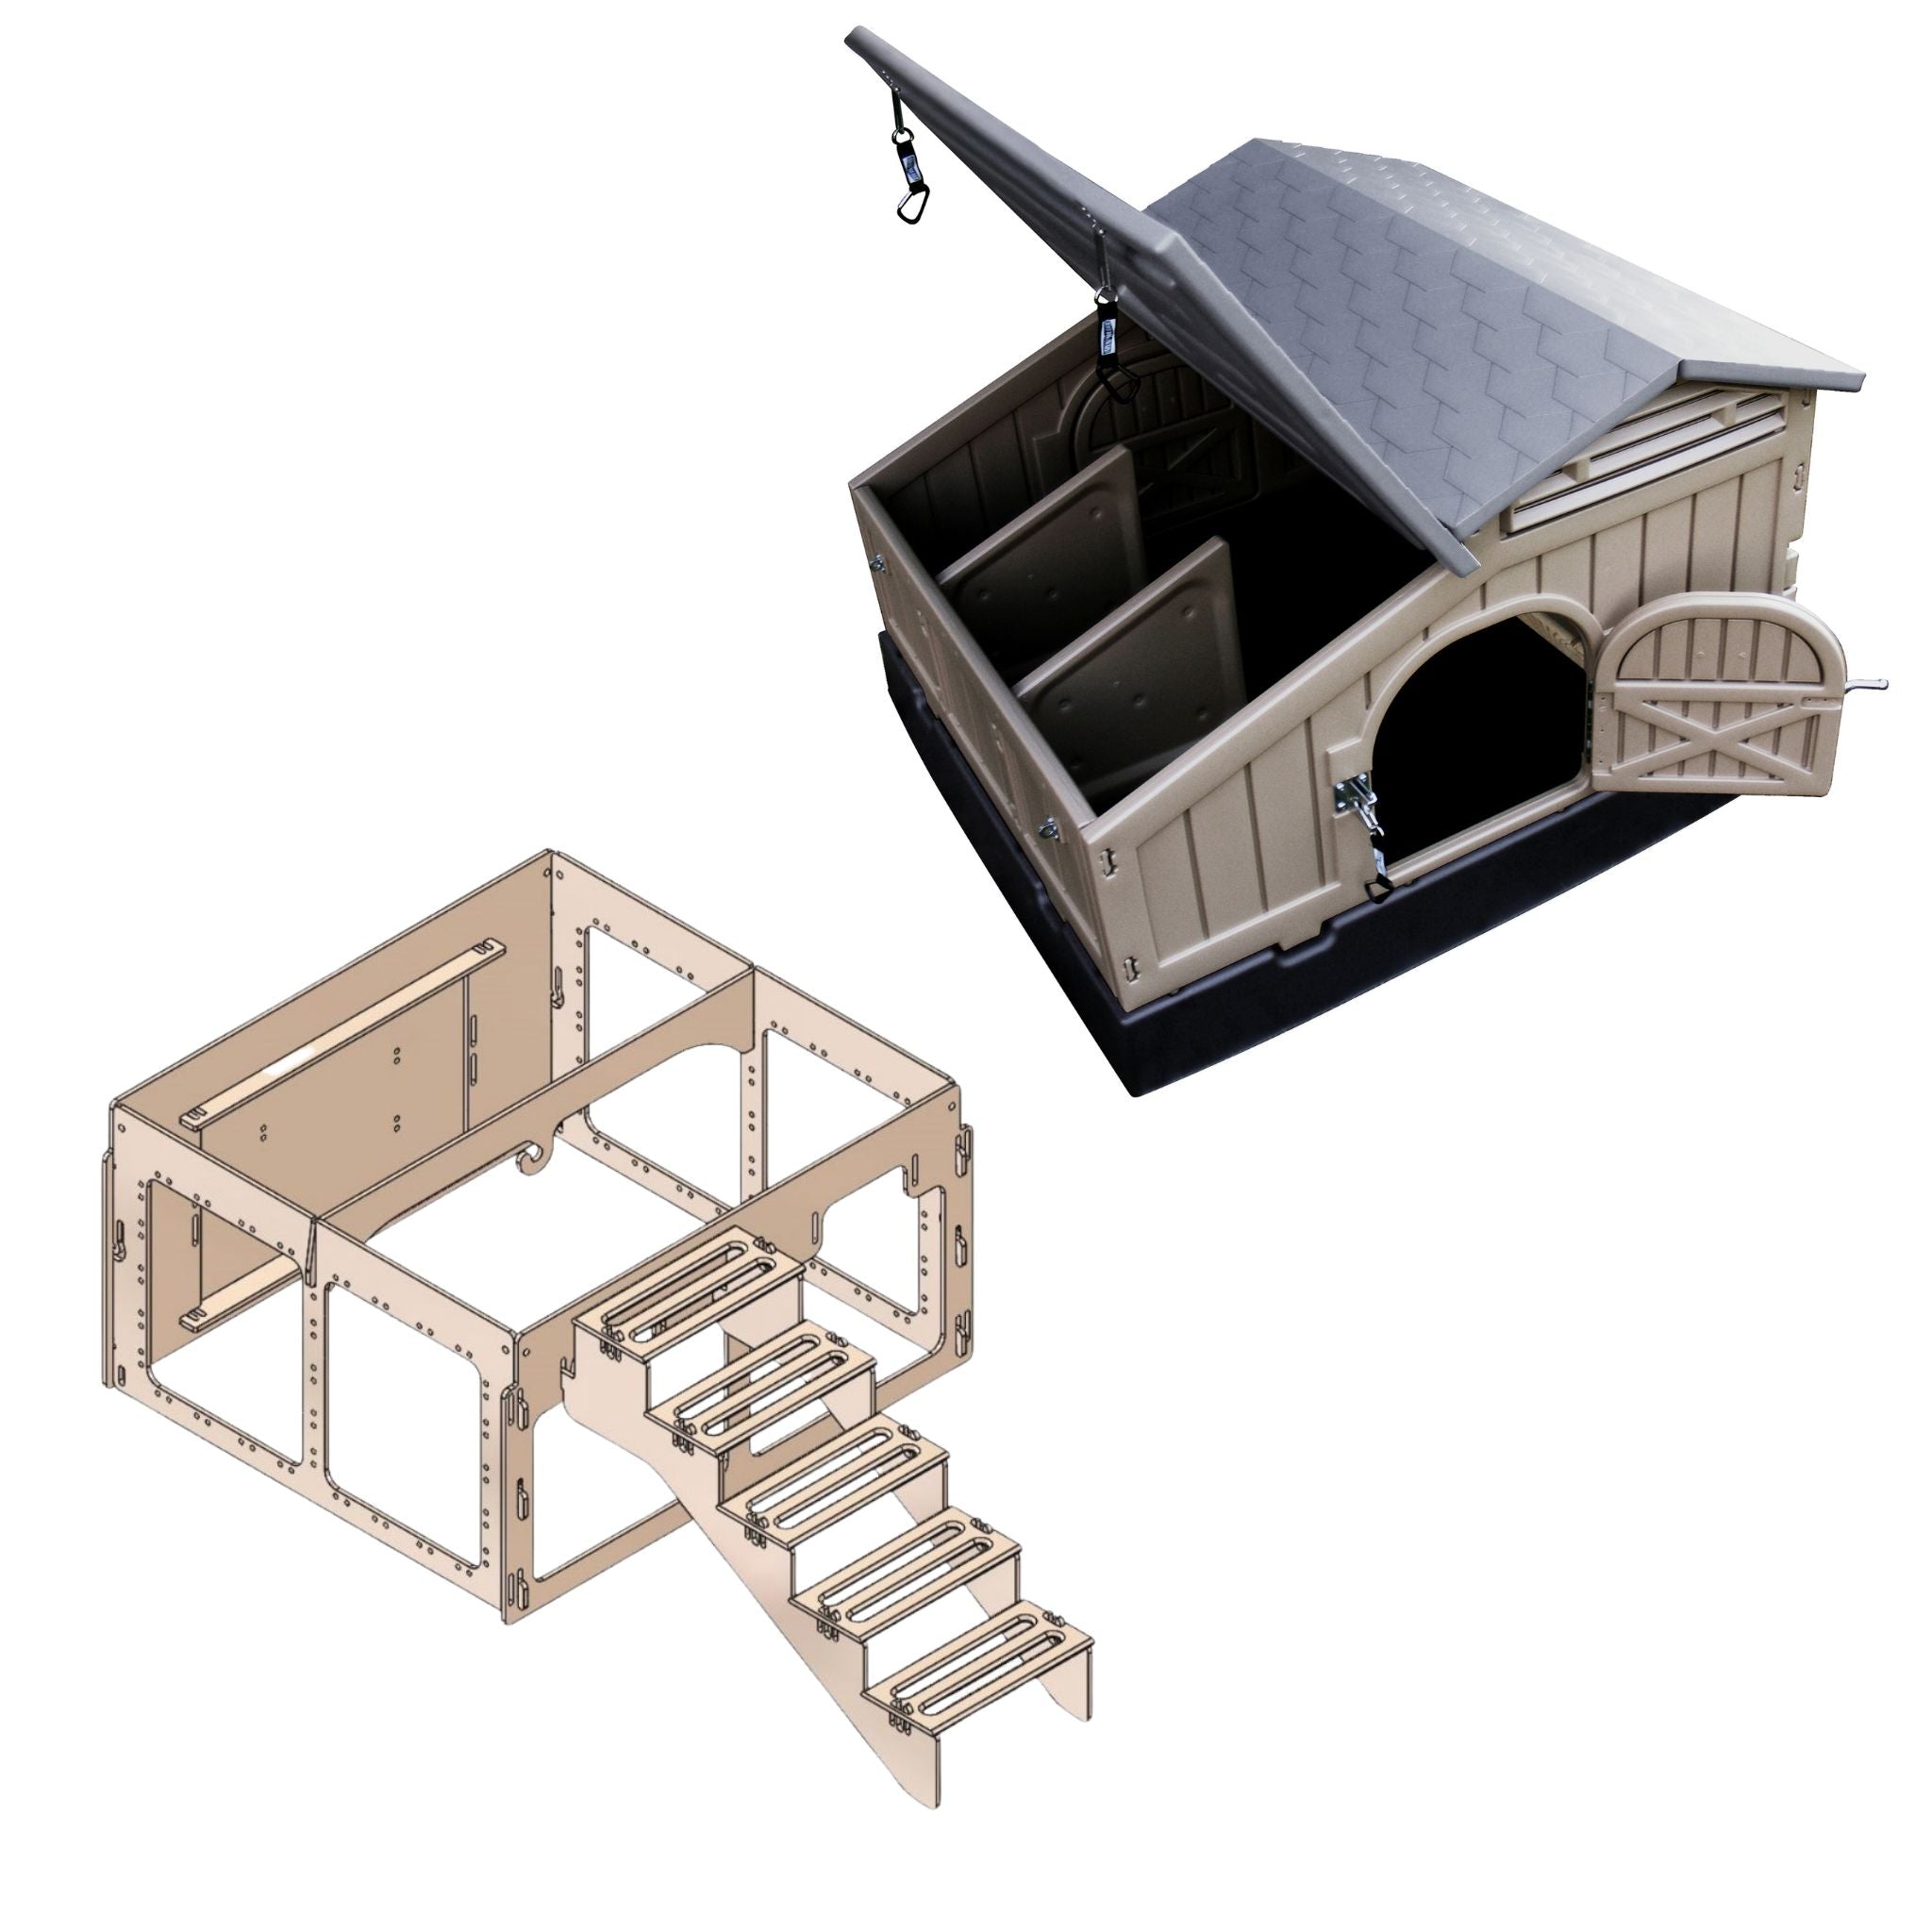 Hatching Time. Chicken coop with Stand and Stairs. Image shows standard chicken coop with roof open and front door open. 